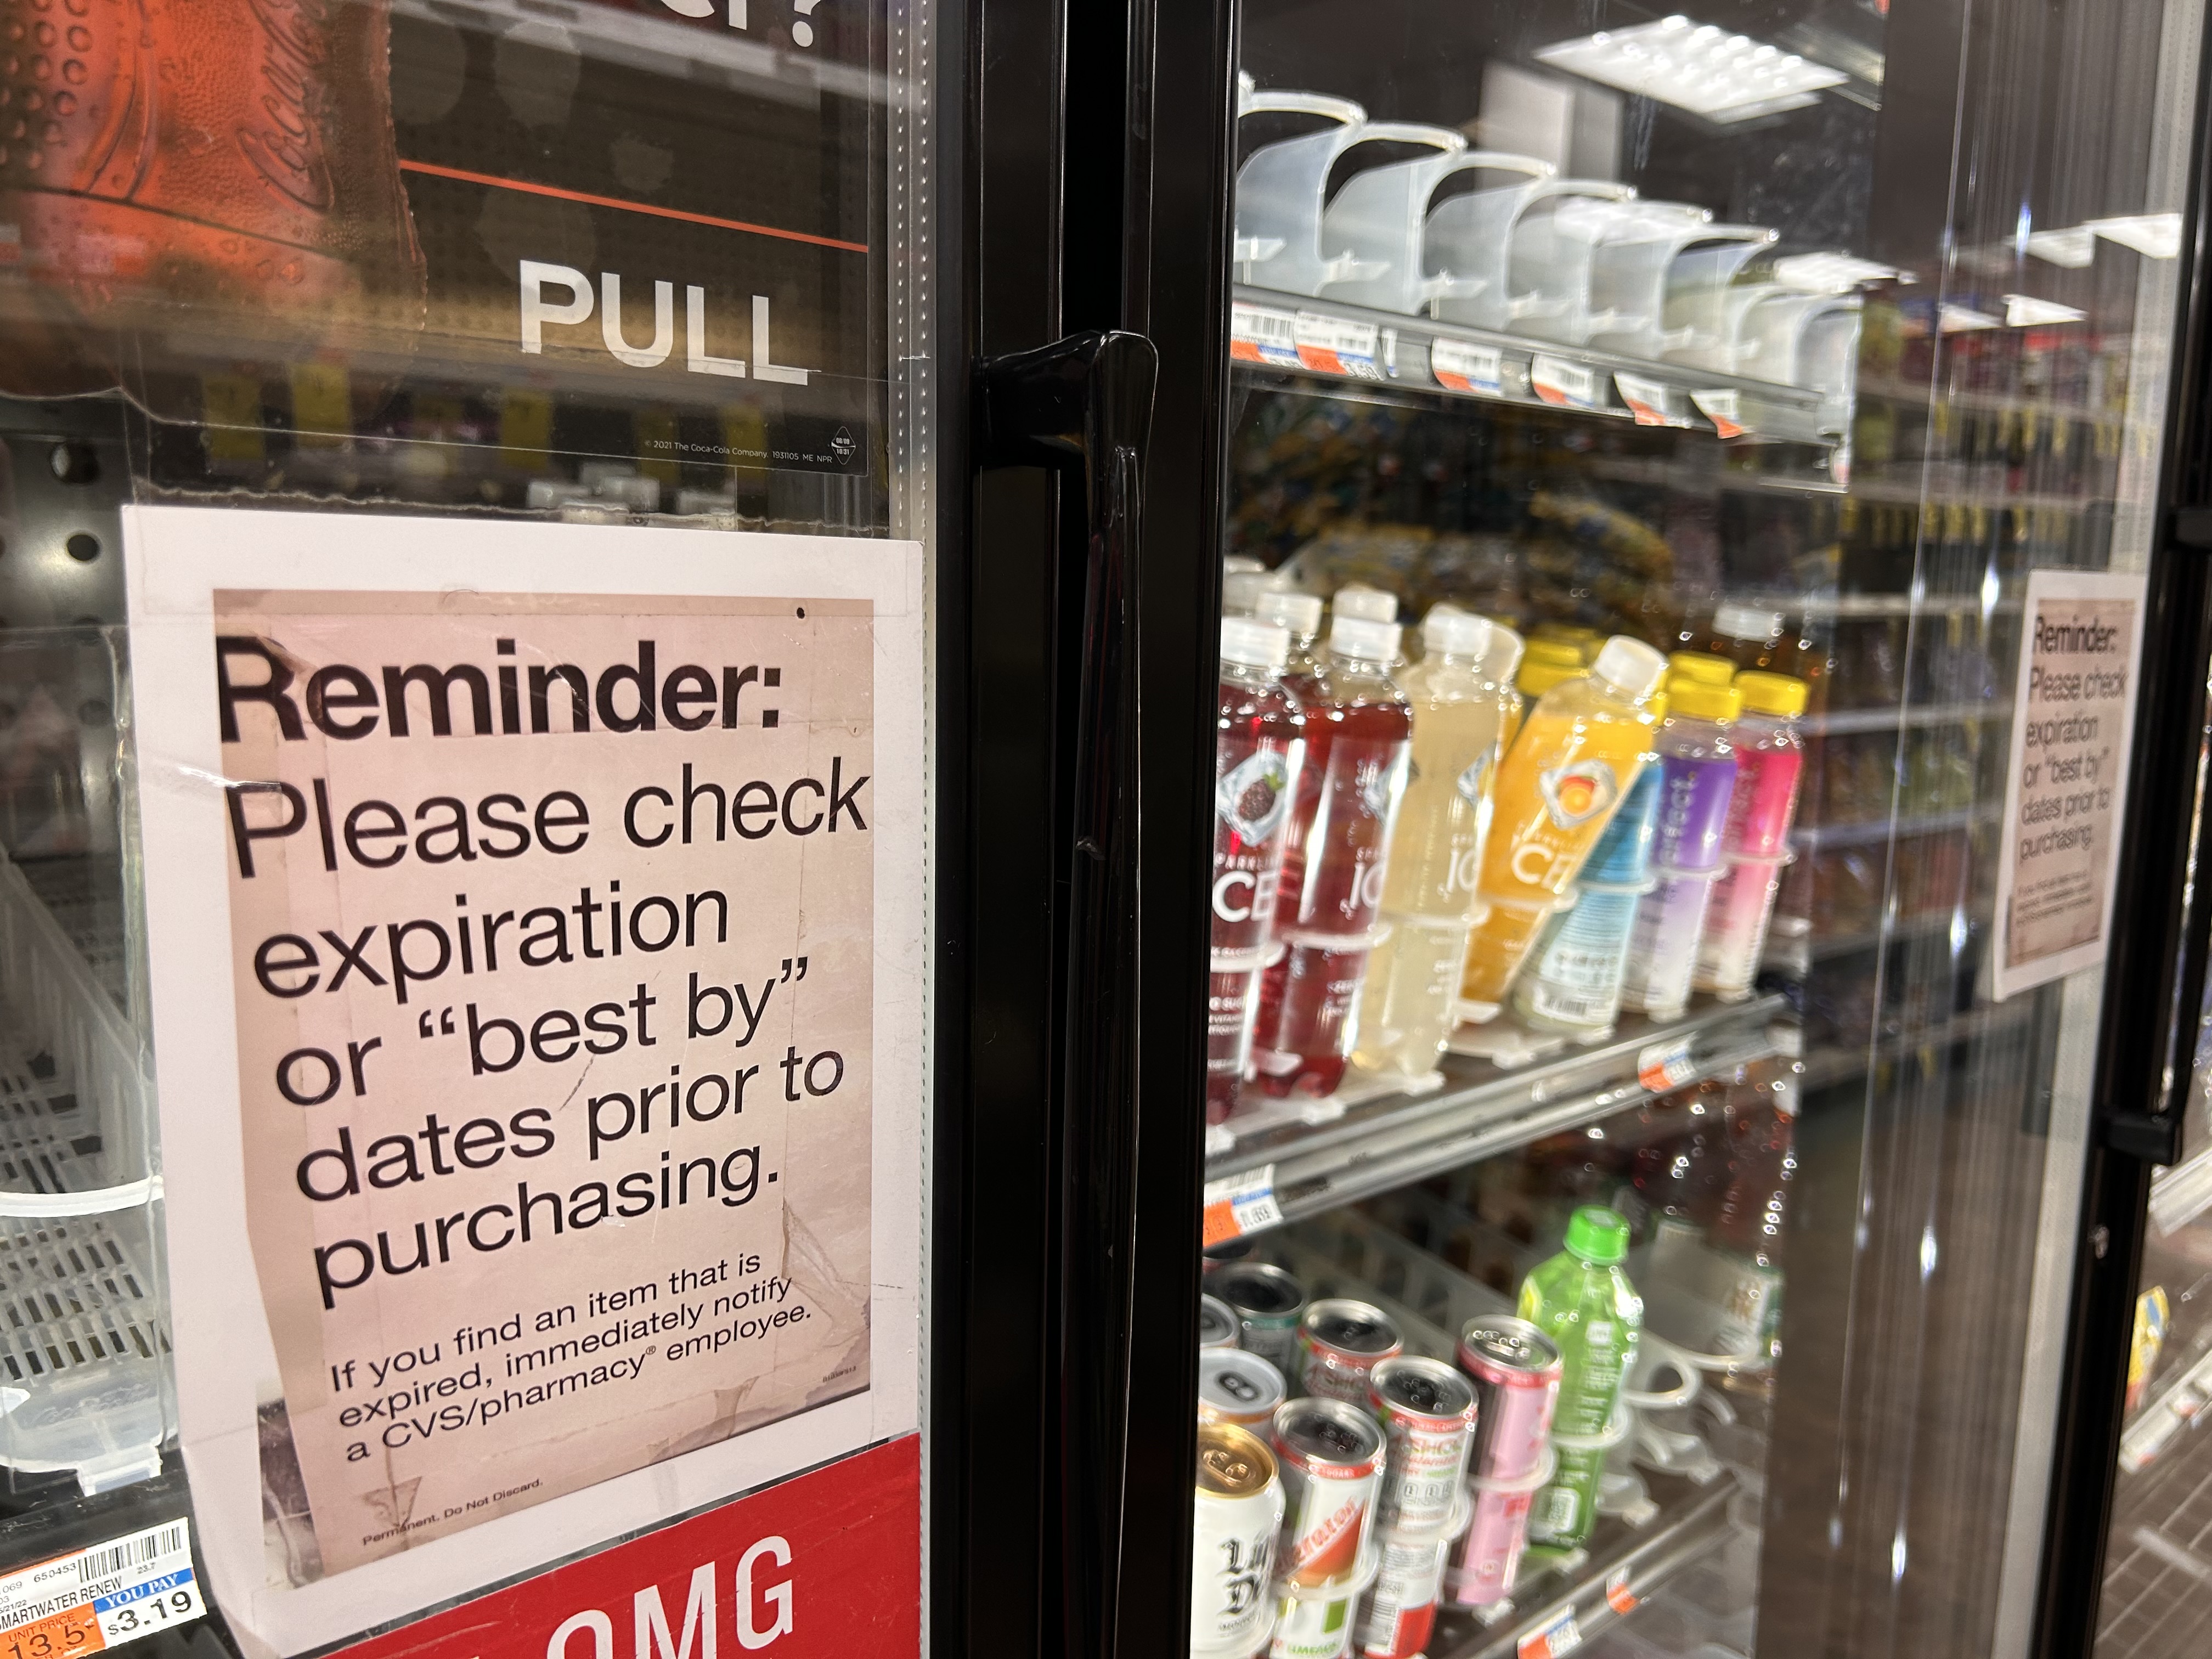 Reminder, Please check expiration or best by dates prior to purchasing sign on refrigerator doors, CVS store, Queens, New York